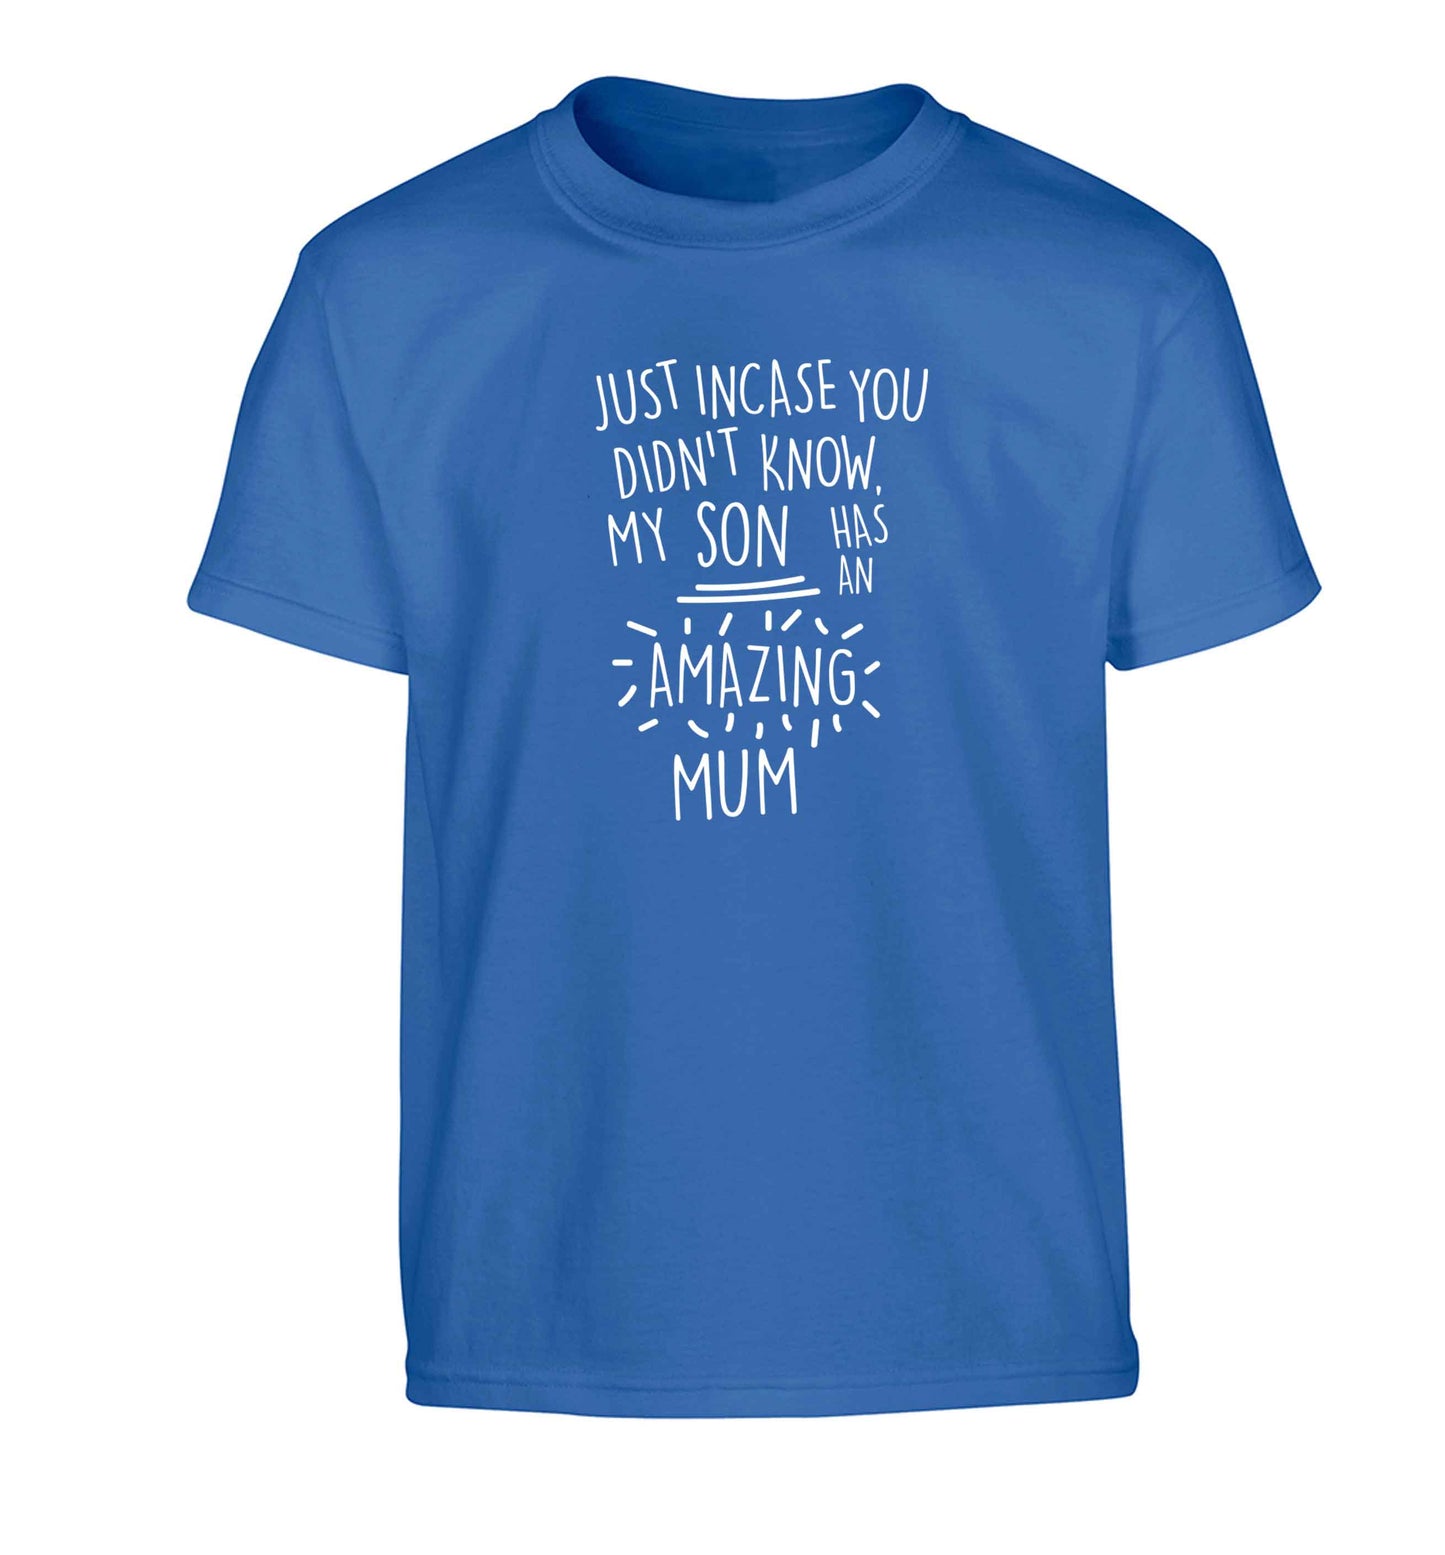 Just incase you didn't know my son has an amazing mum Children's blue Tshirt 12-13 Years